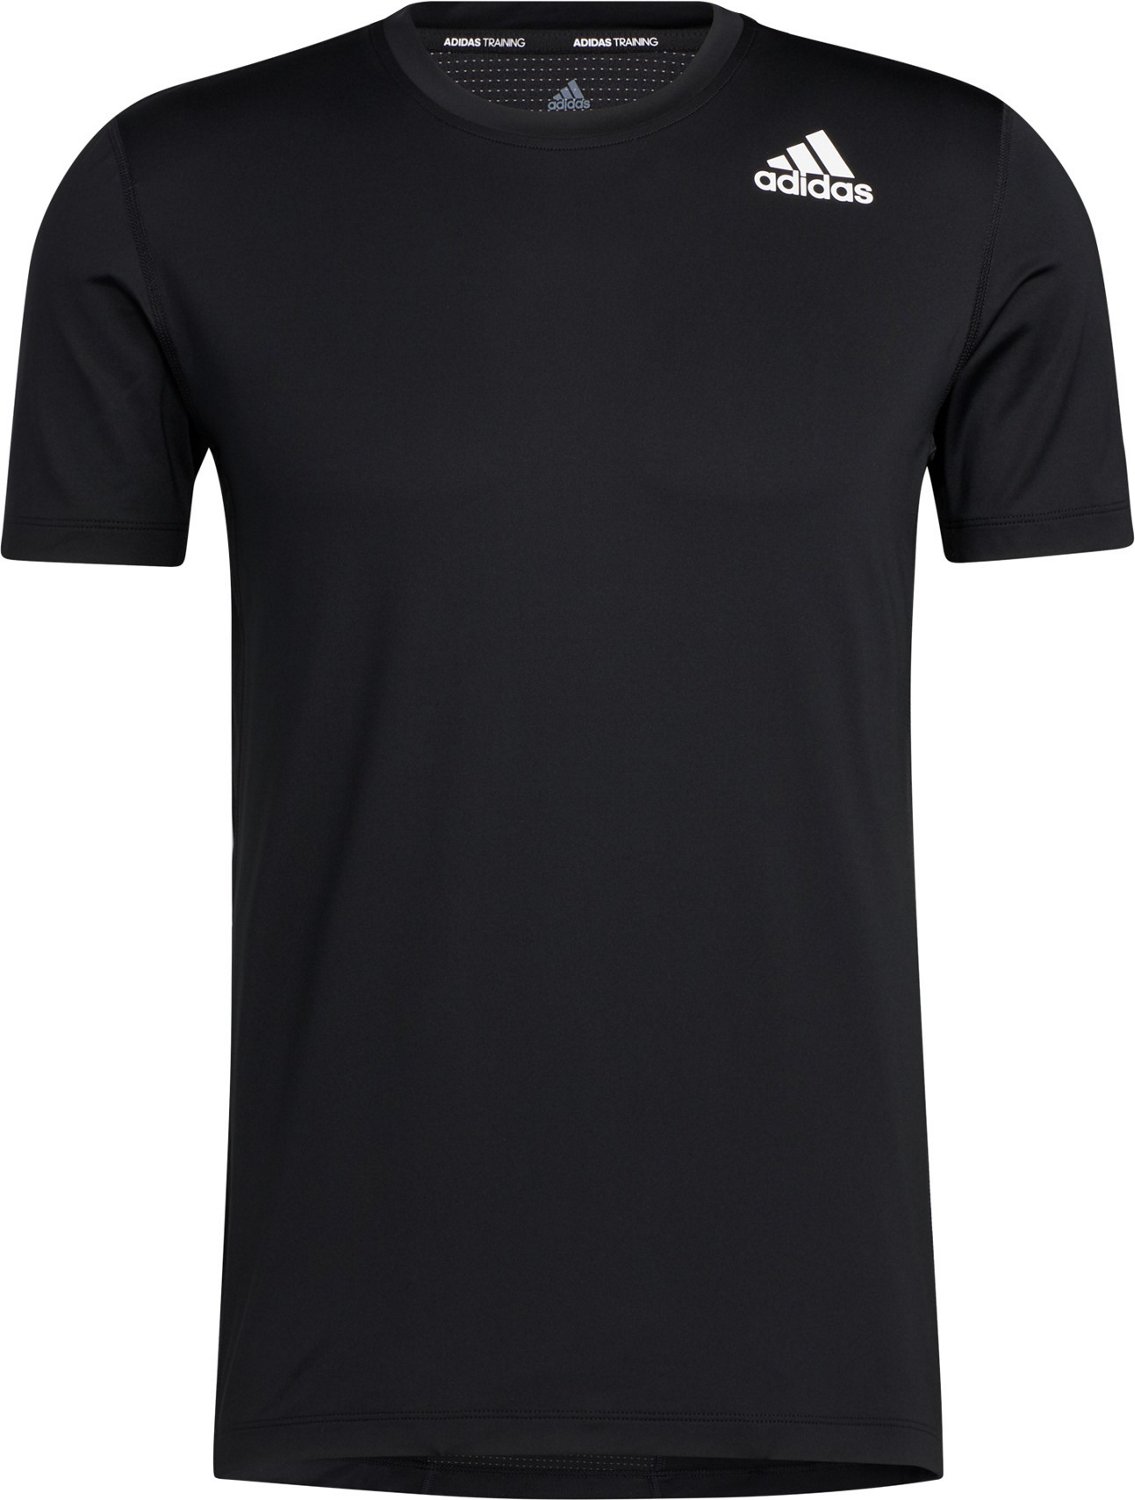 adidas Men's TechFit Short Sleeve Fitted Top | Academy